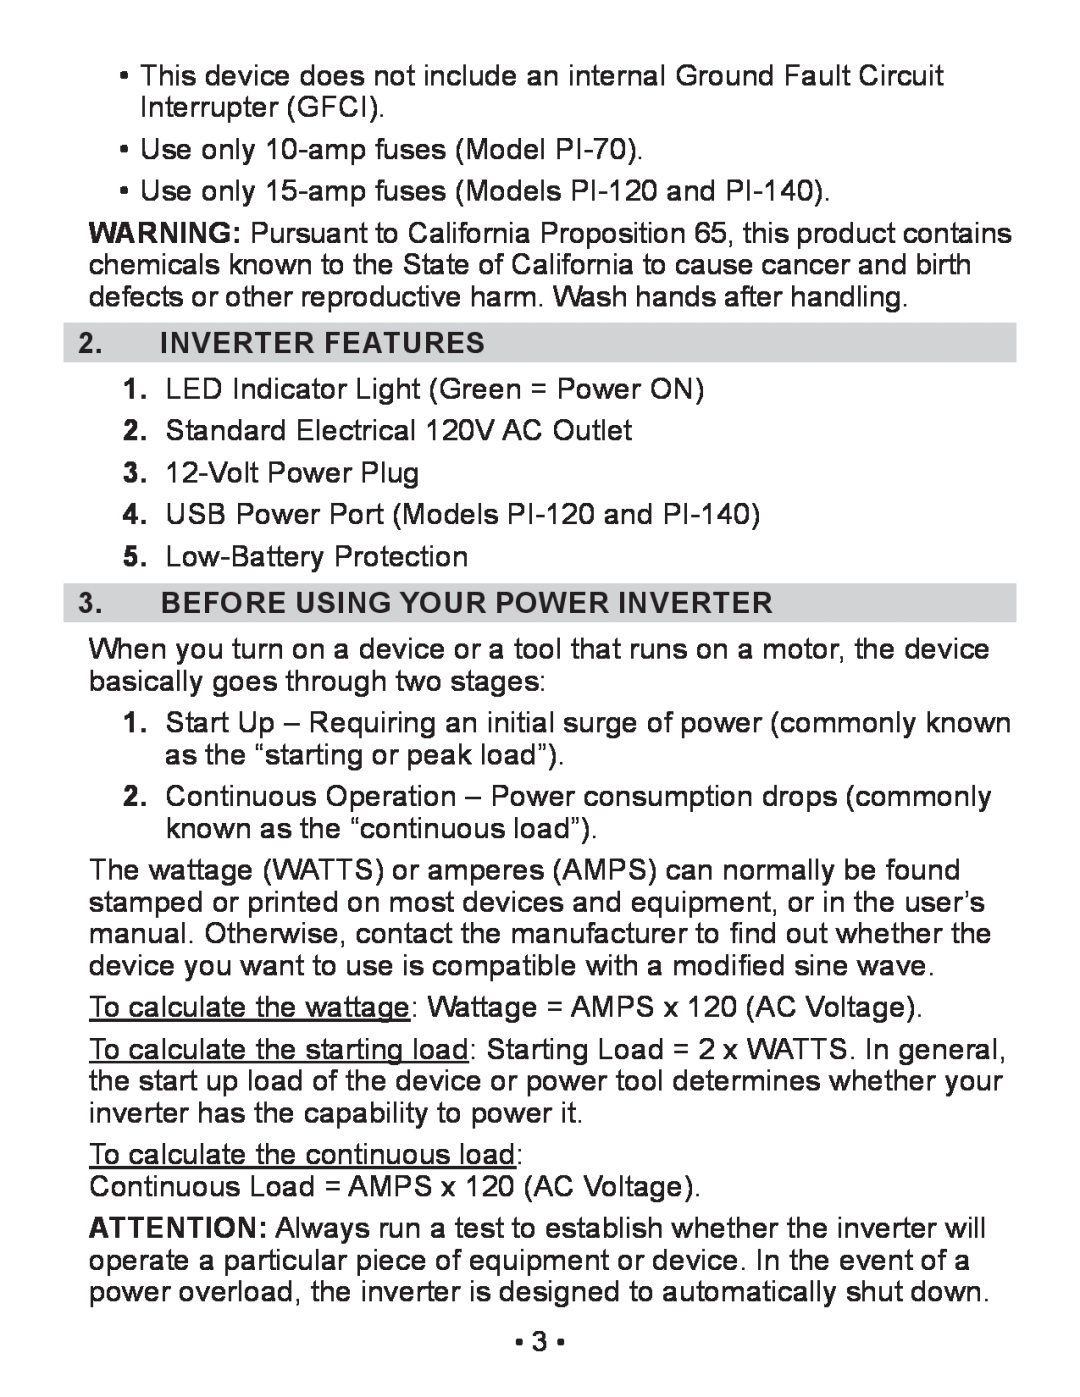 Schumacher PI-70 owner manual Inverter Features, Before Using Your Power Inverter 